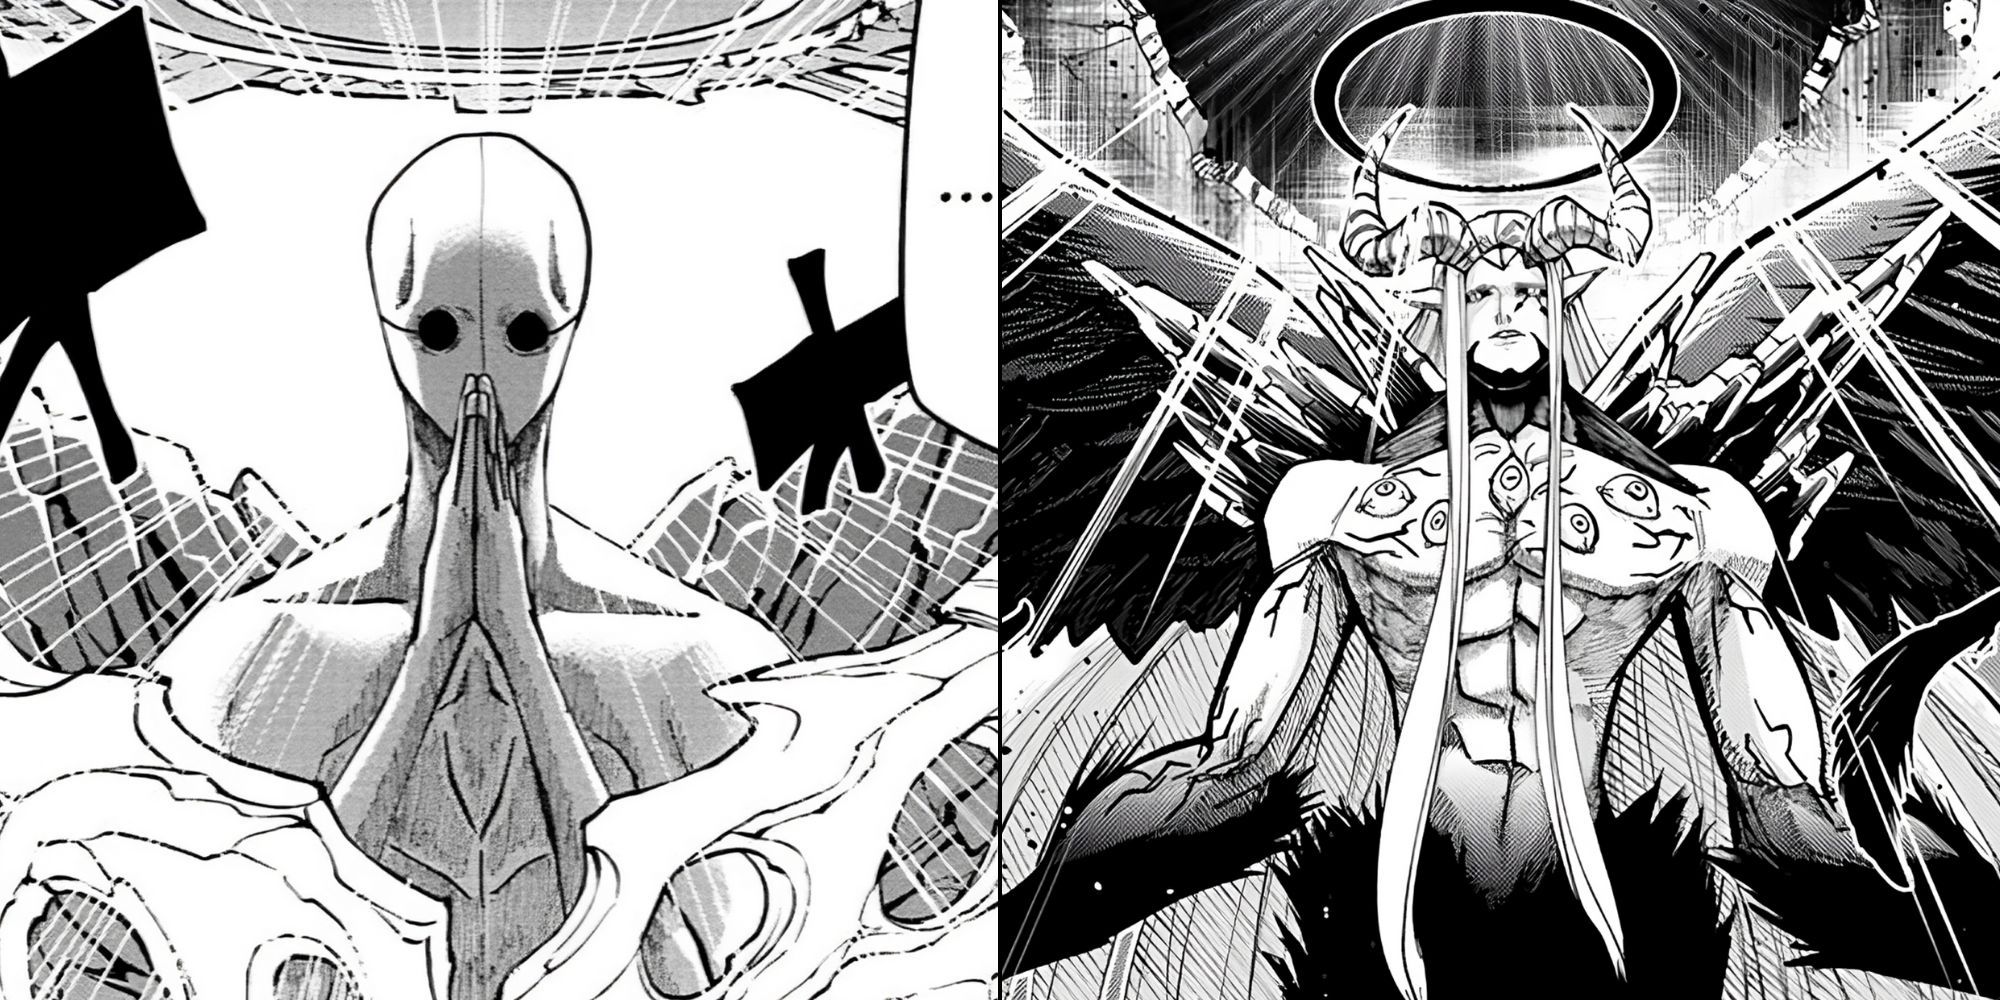 Innocent Zero demonic and perfect being forms in Mashle manga